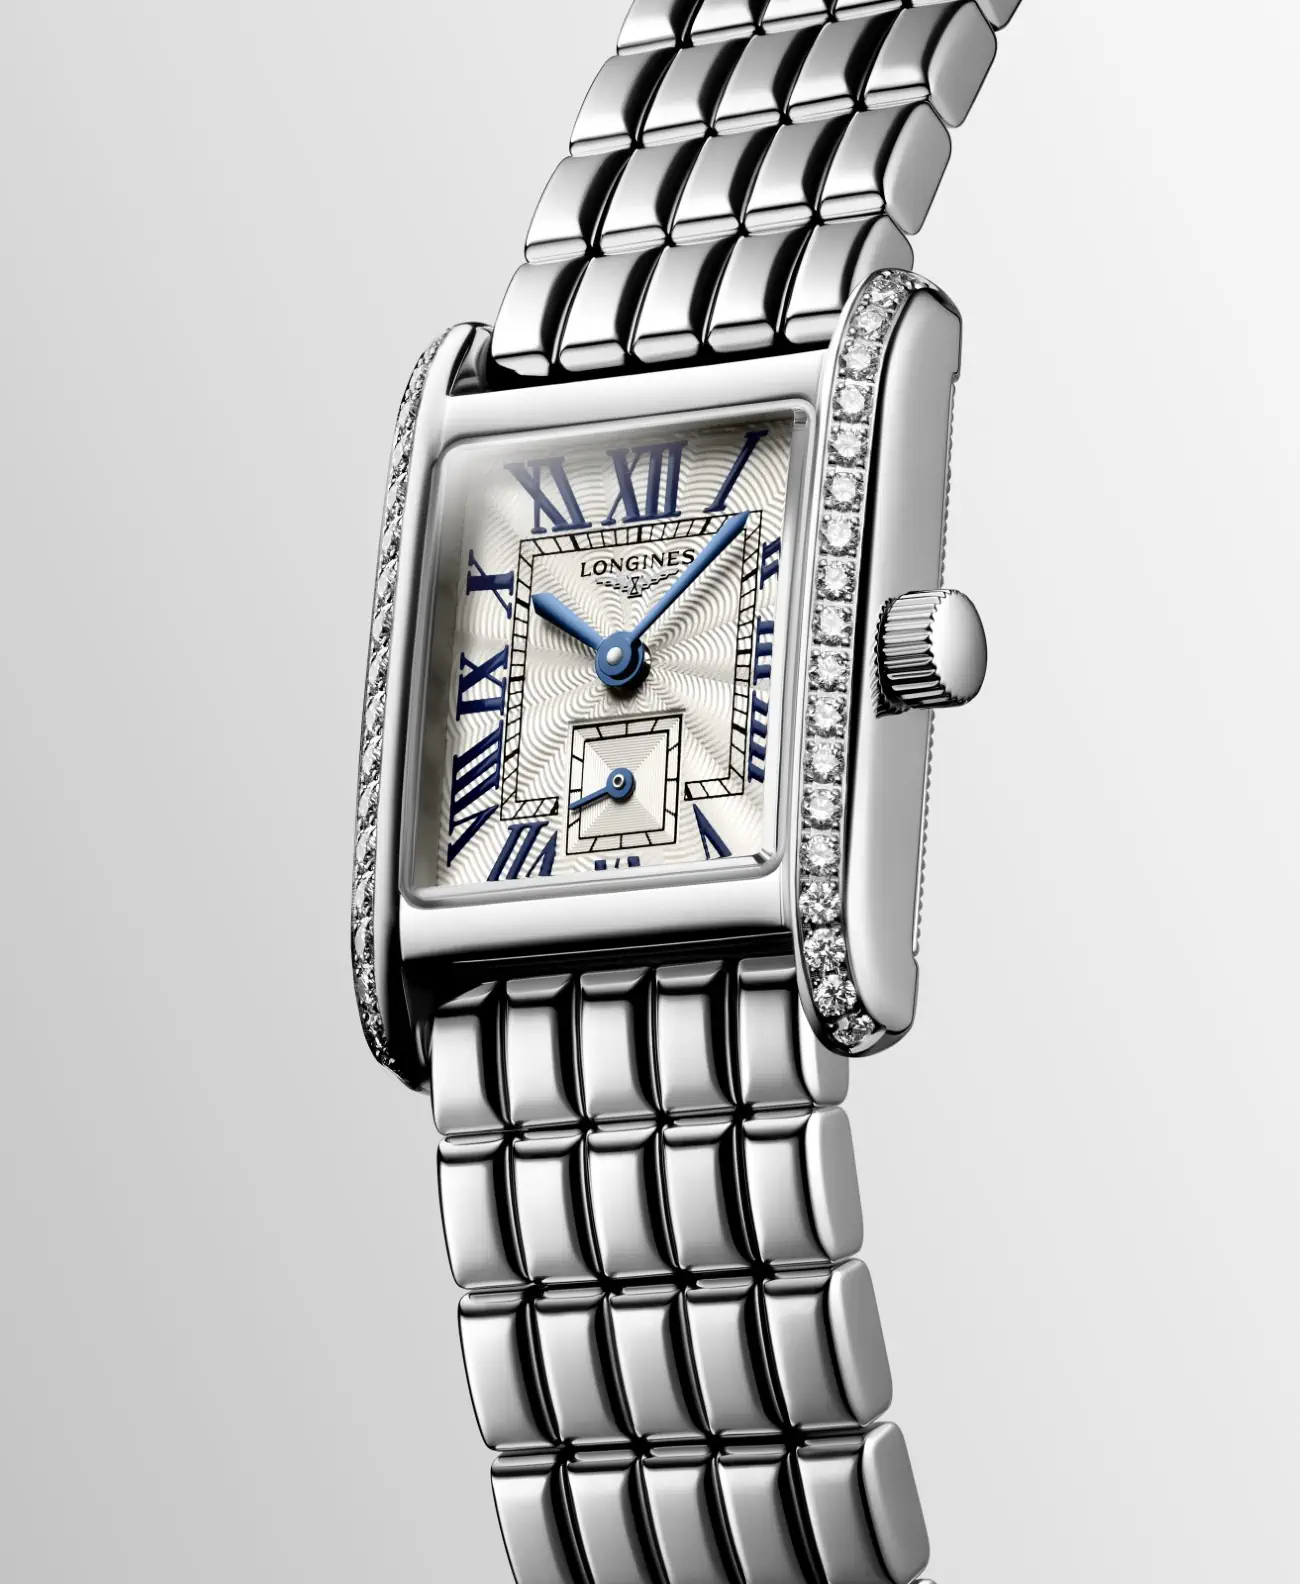 Elegance in the smallest detail with Longines Mini DolceVita